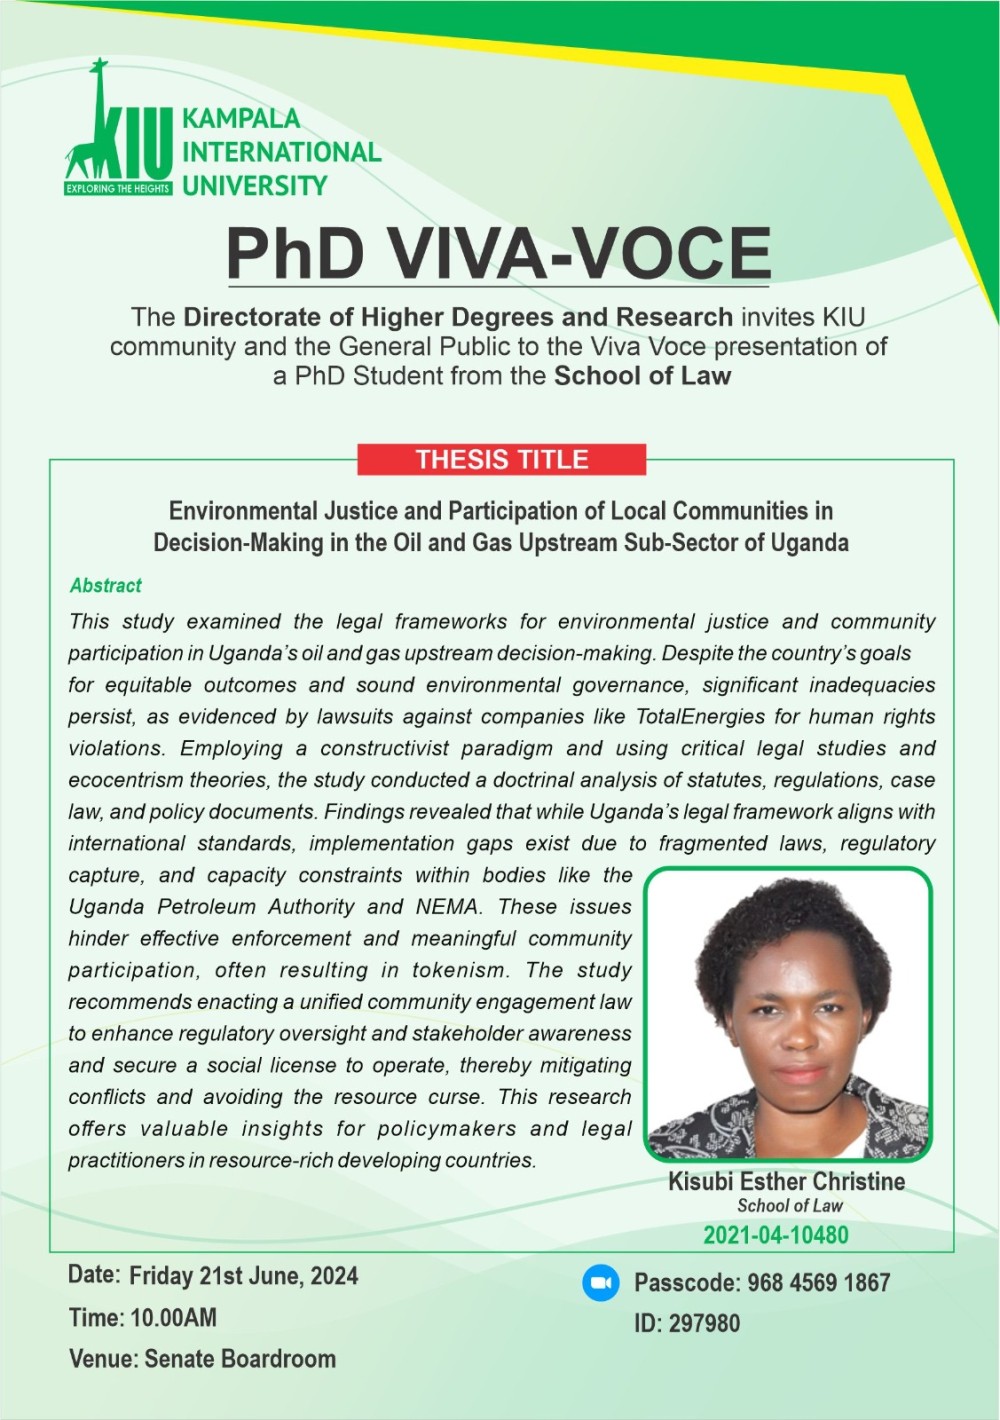 KIU to Host PhD Viva Voce Presentation on Environmental Justice and Community Participation in Uganda’s Oil and Gas Sector